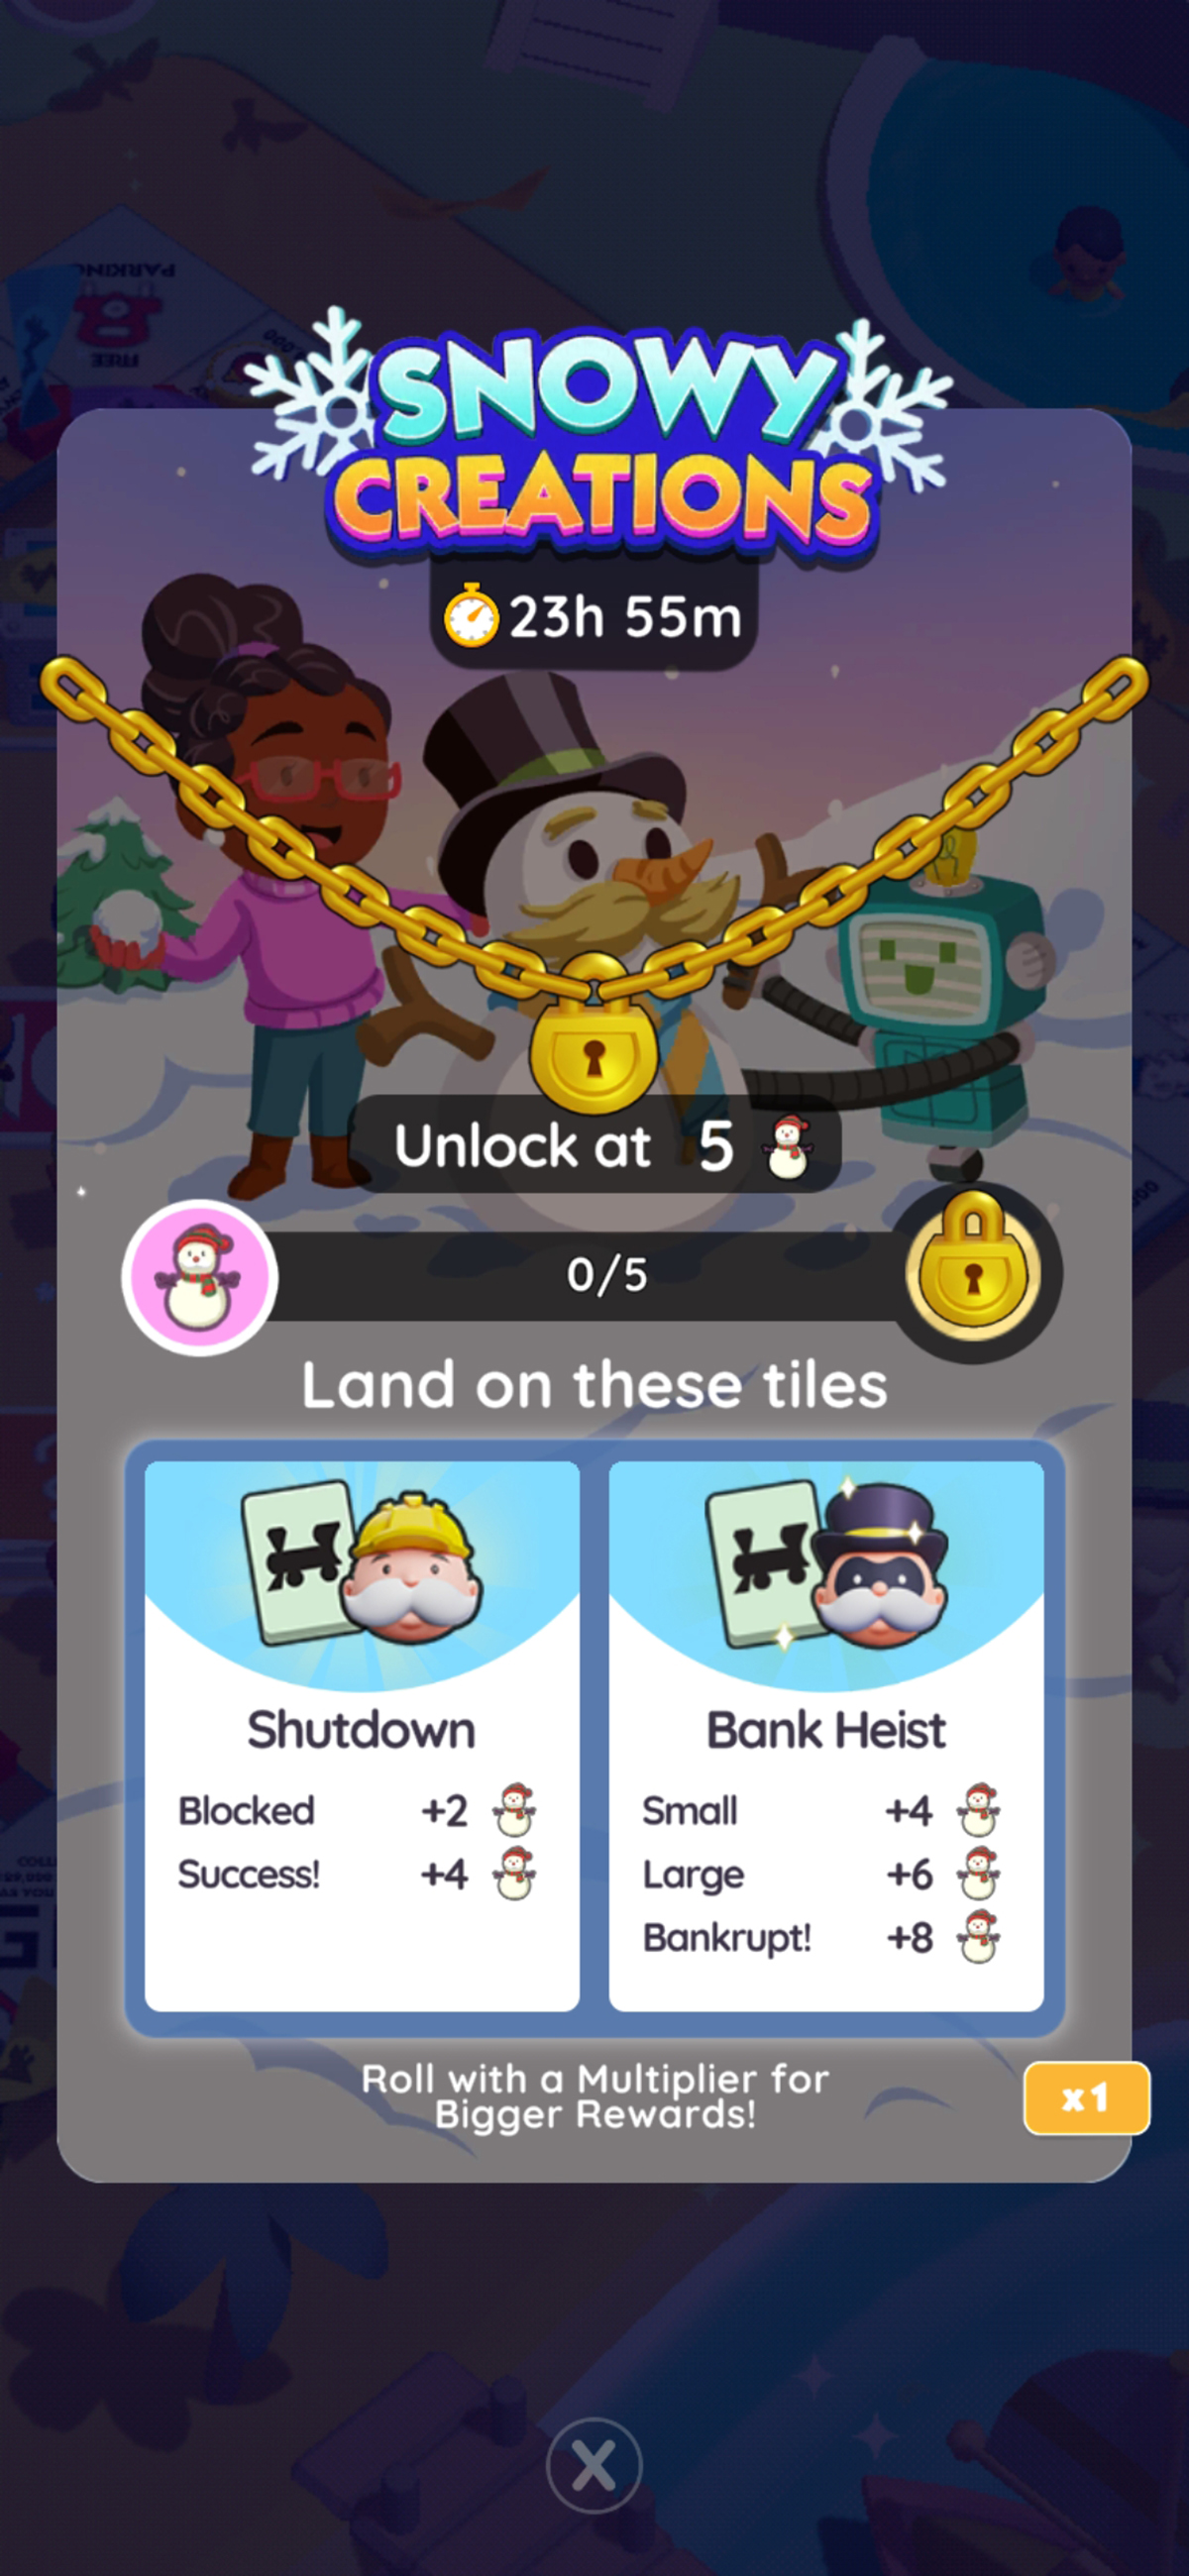 An image for the Snowy Creations tournament in Monopoly GO, as part of an article on all the rewards, milestones, and other prizes players can get.